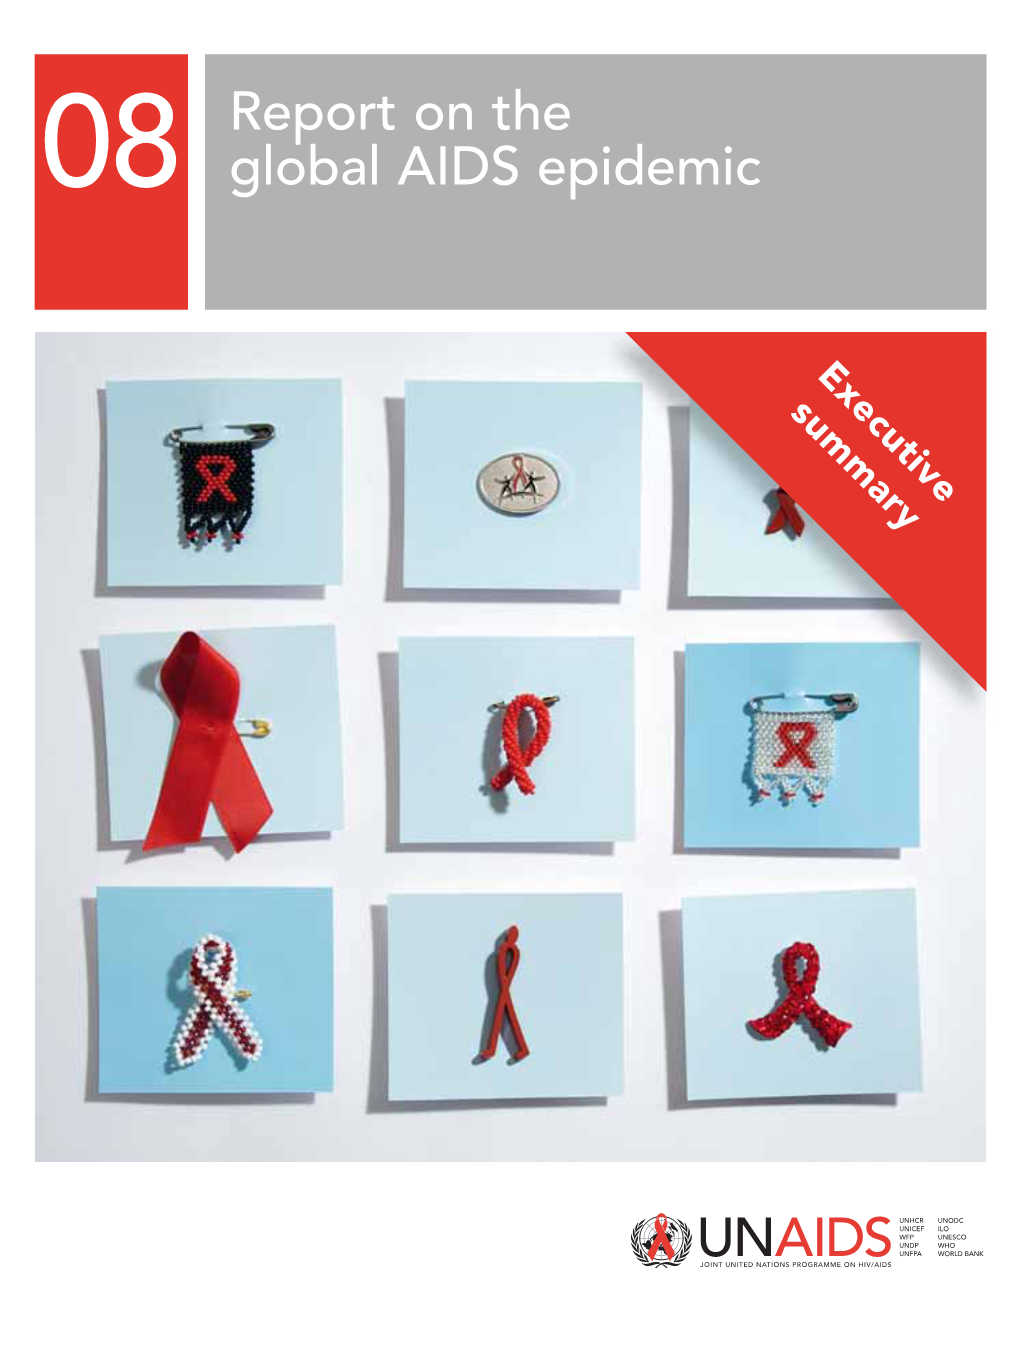 UNAIDS/WHO (2008) Report on the Global HIV/AIDS Epidemic